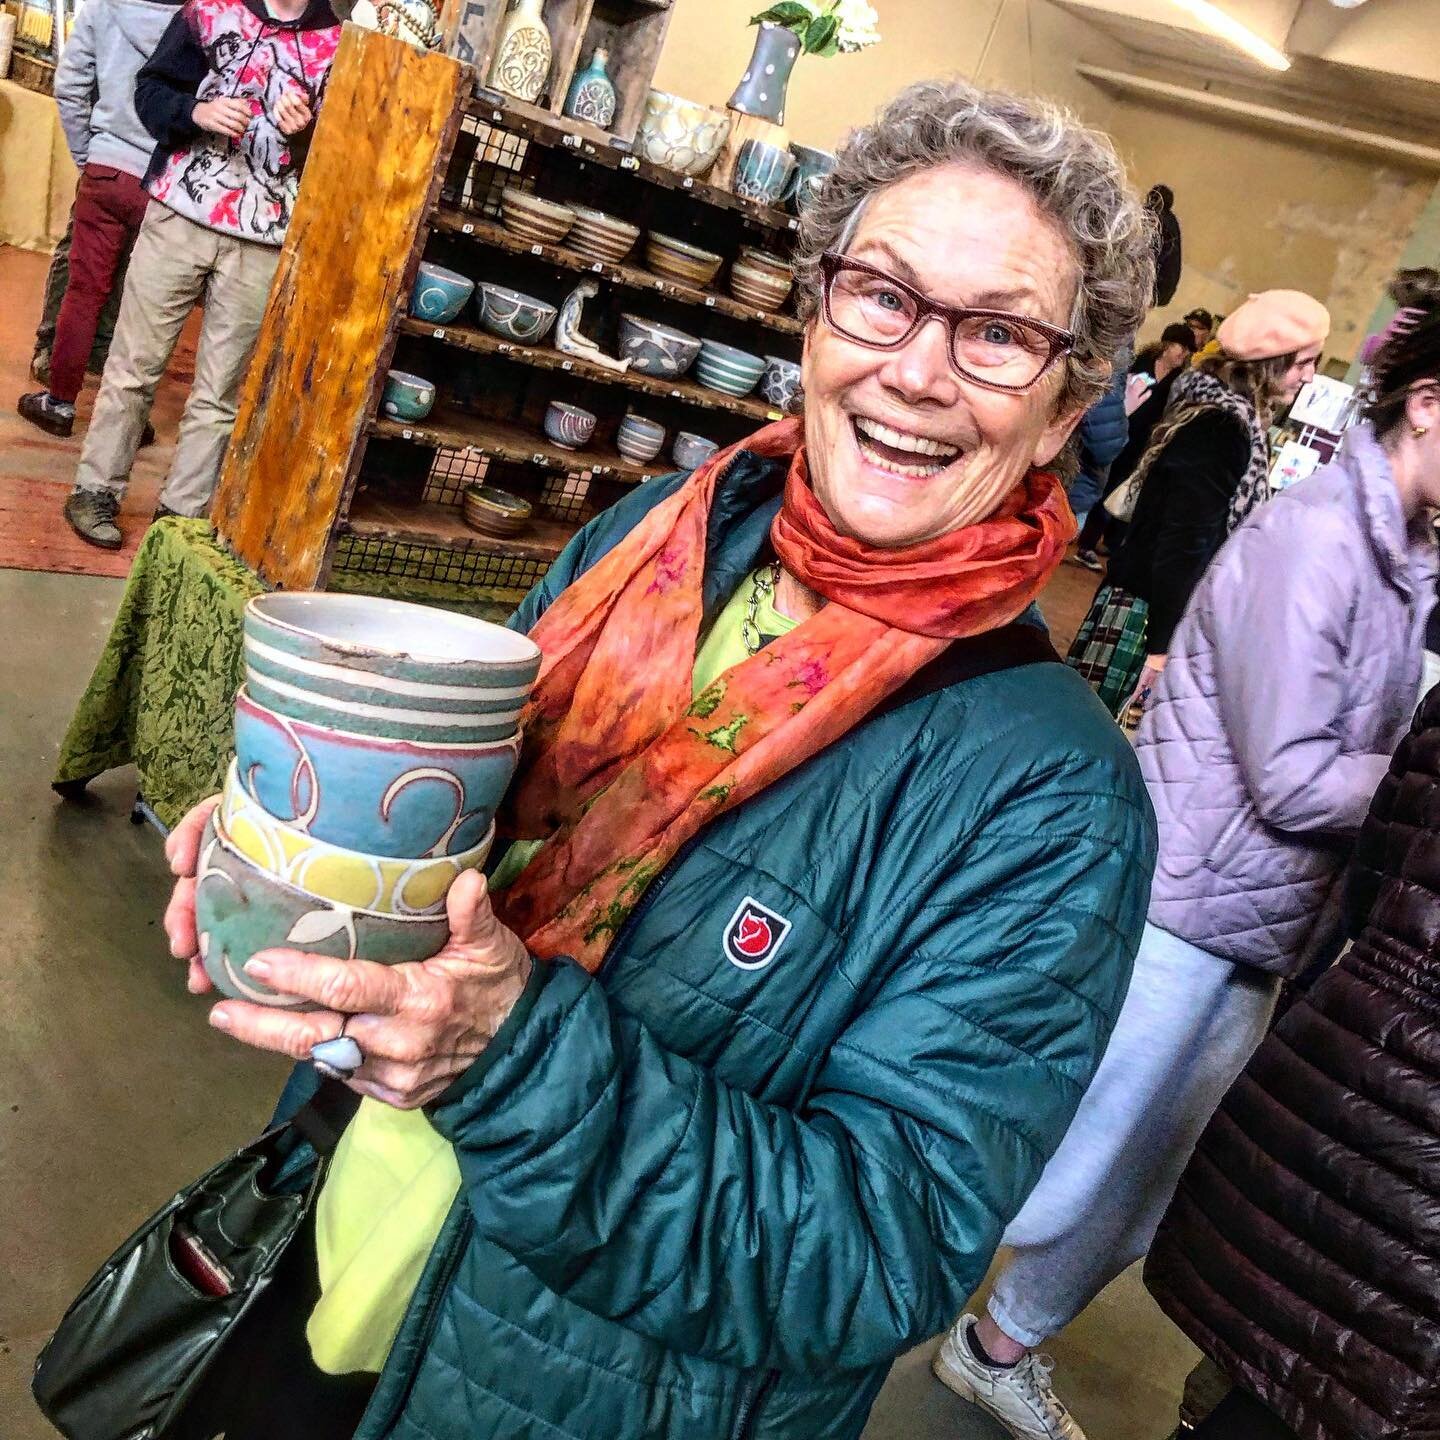 Wow, what an amazing day! I hit the ground running this morning at 6am and it&rsquo;s been non stop for hours and totally forgot to take any pix for most of the show. I loved watching my old friend Hilary have fun picking out her perfect bowl stack, 